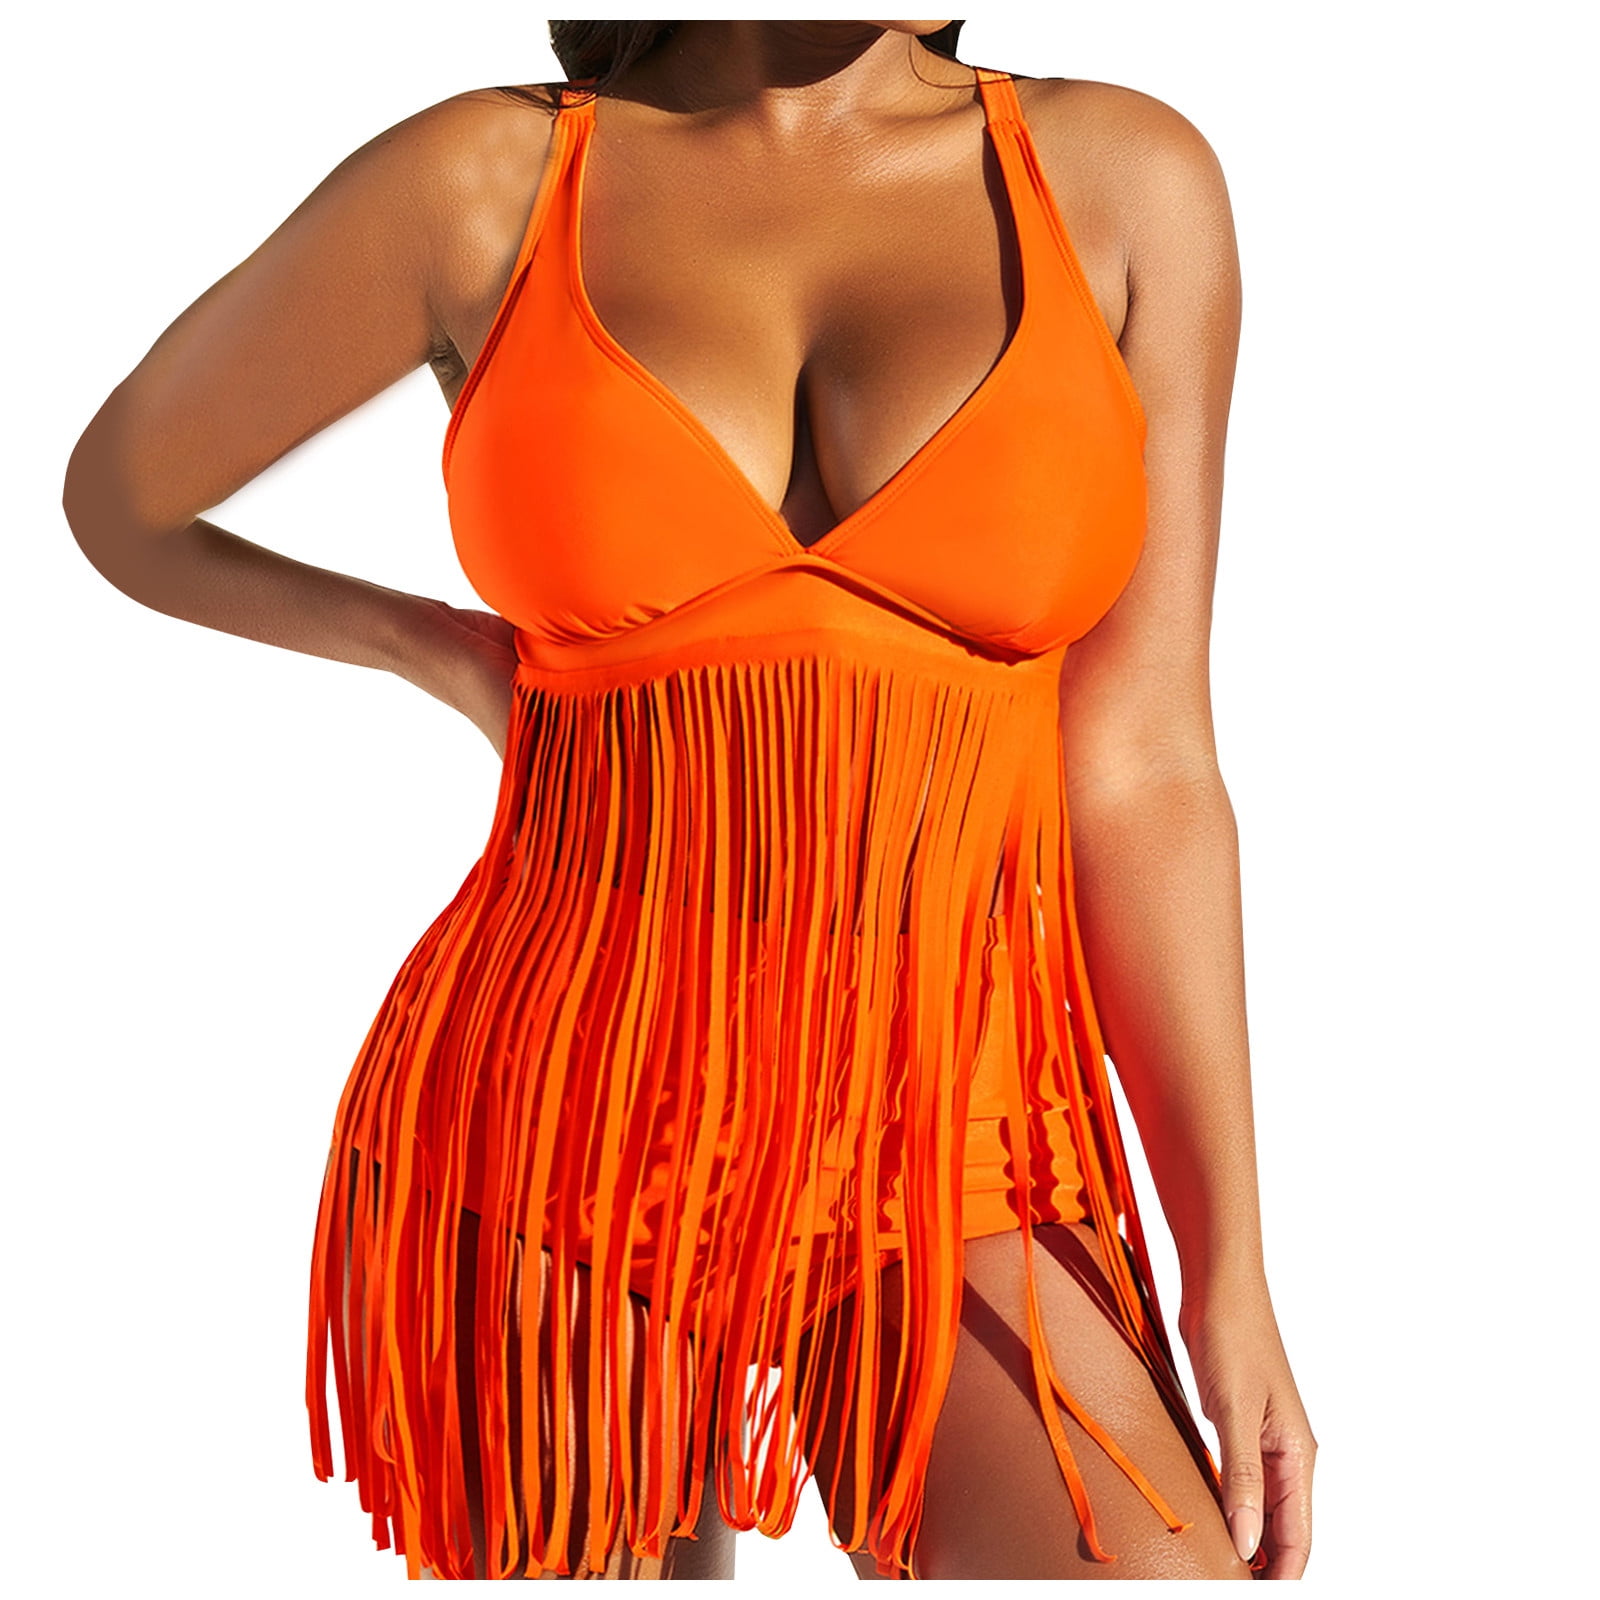 TQWQT Womens High Cut Bikini Sets Solid Color Cheeky Swimsuit Deep V Neck  Sexy Two Piece Bathing Suits